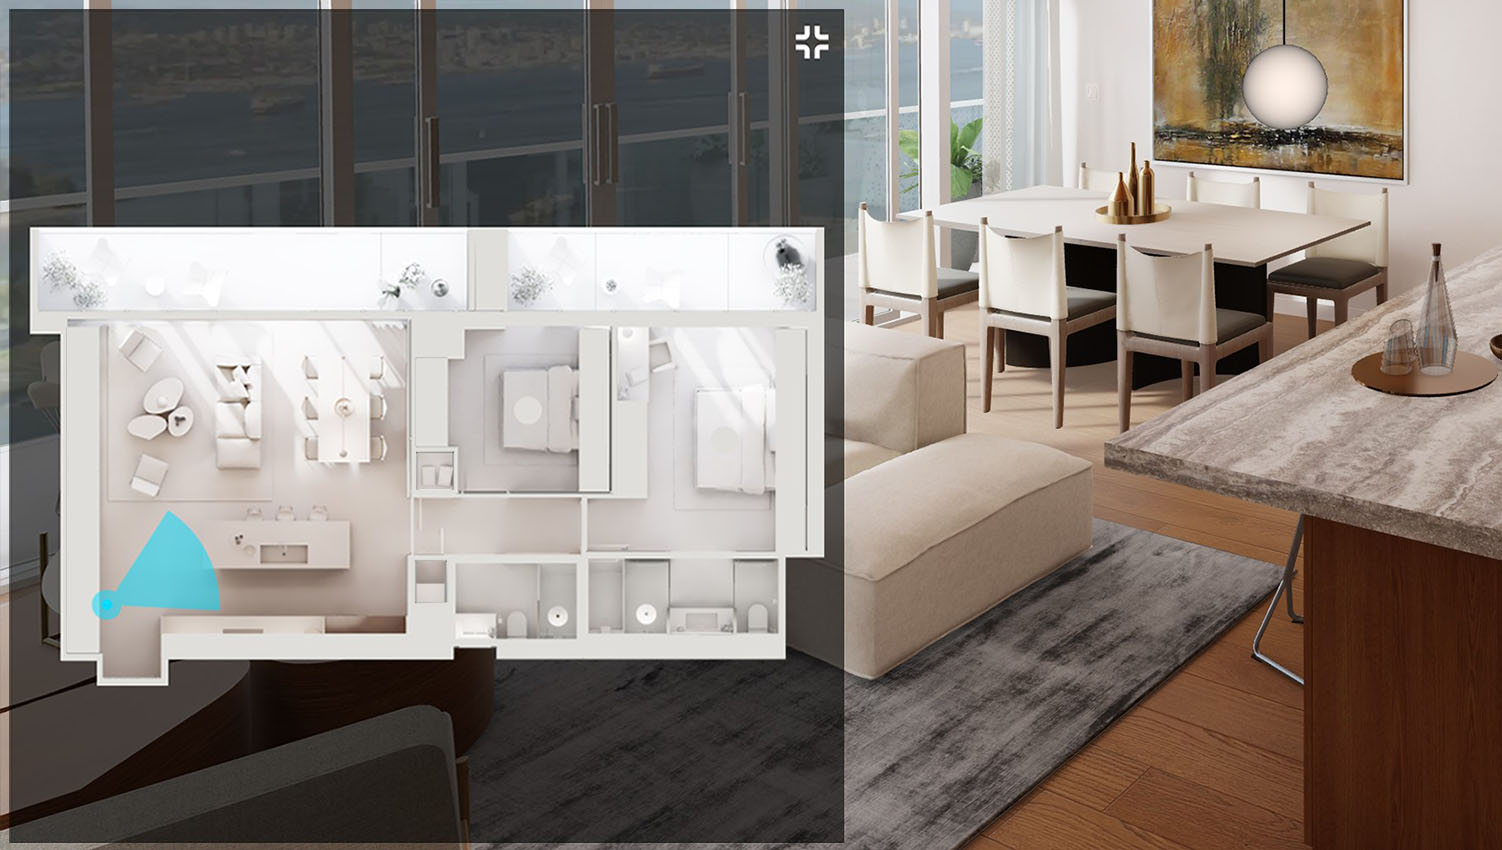 Top and orbit views provide buyers with a chance to quickly transition from analyzing even the smallest design details to examining the layout of the apartment or property. All of these features contribute to an important sense of scale.